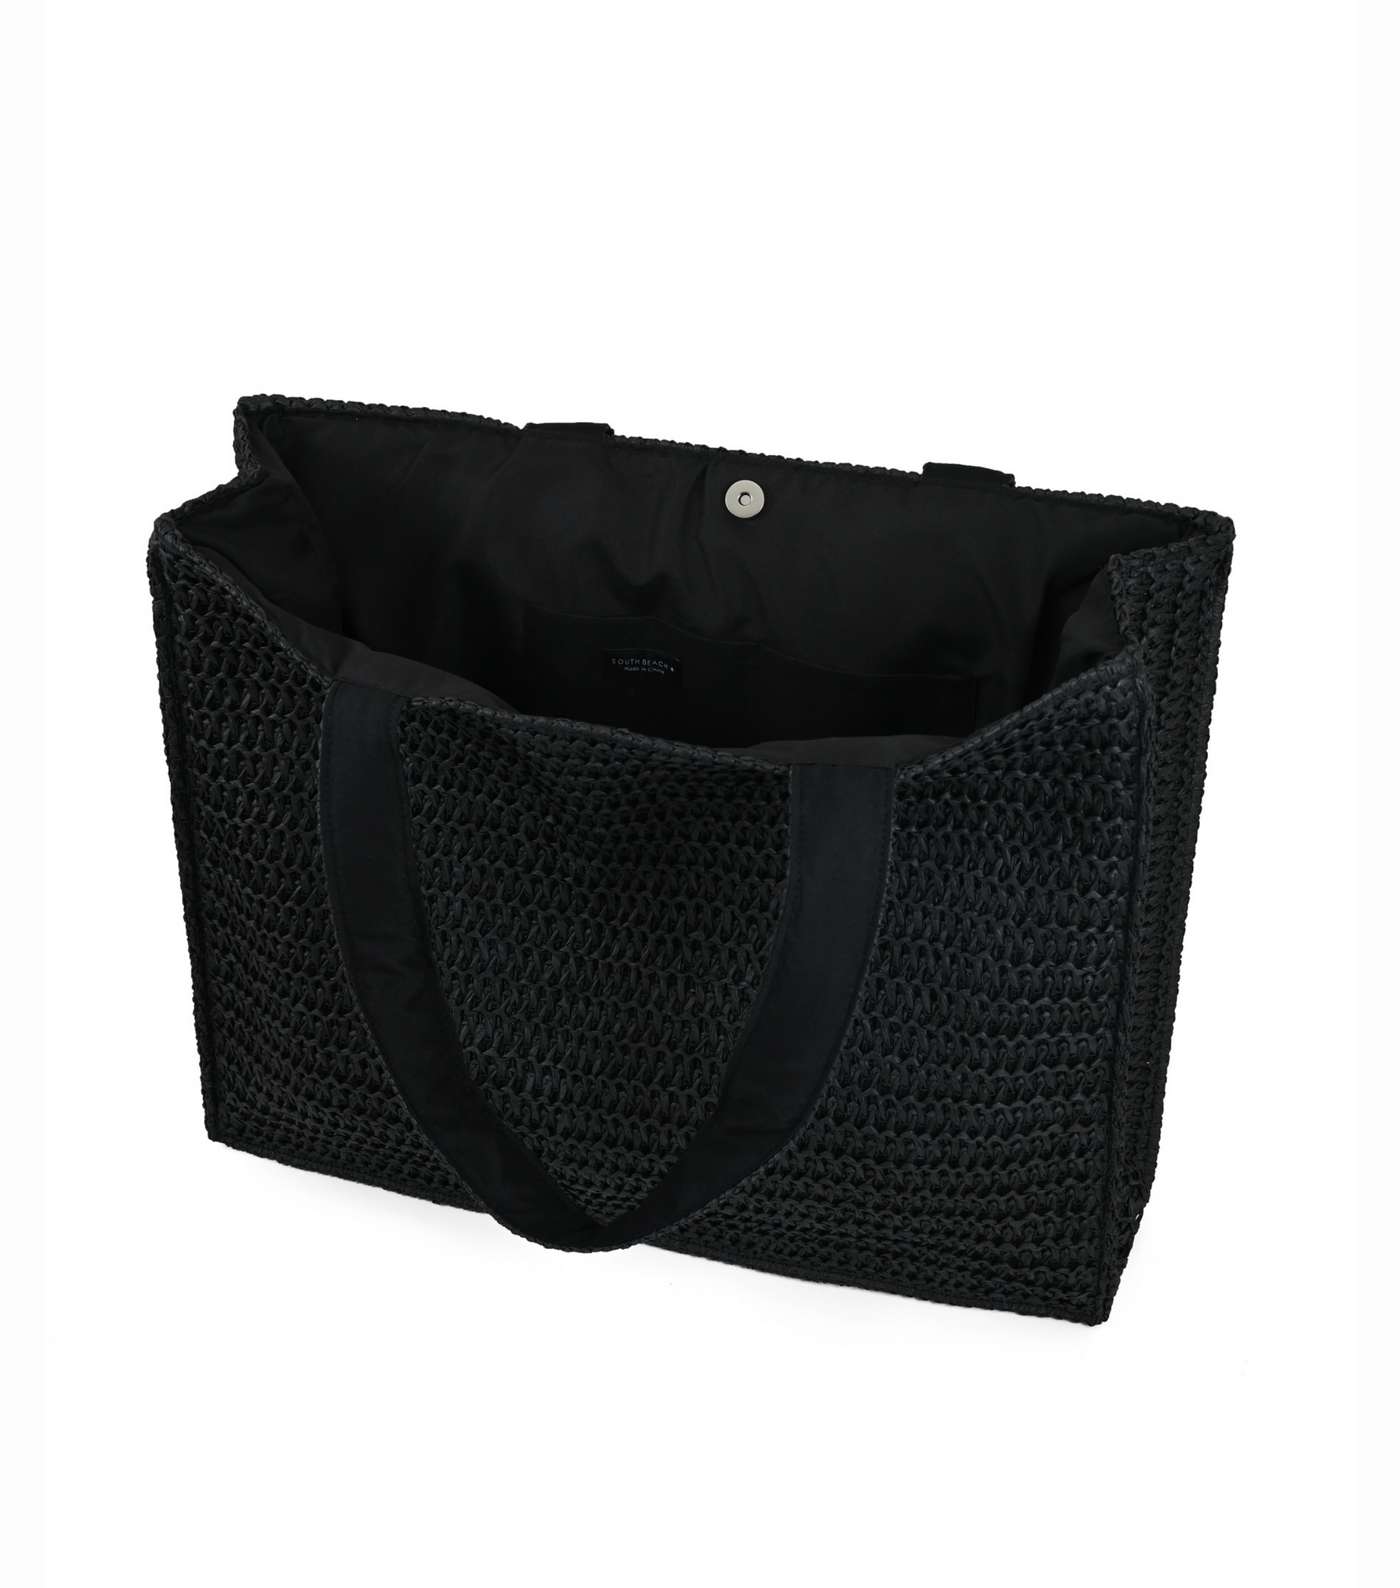 South Beach Black Woven Straw Effect Tote Bag Image 5